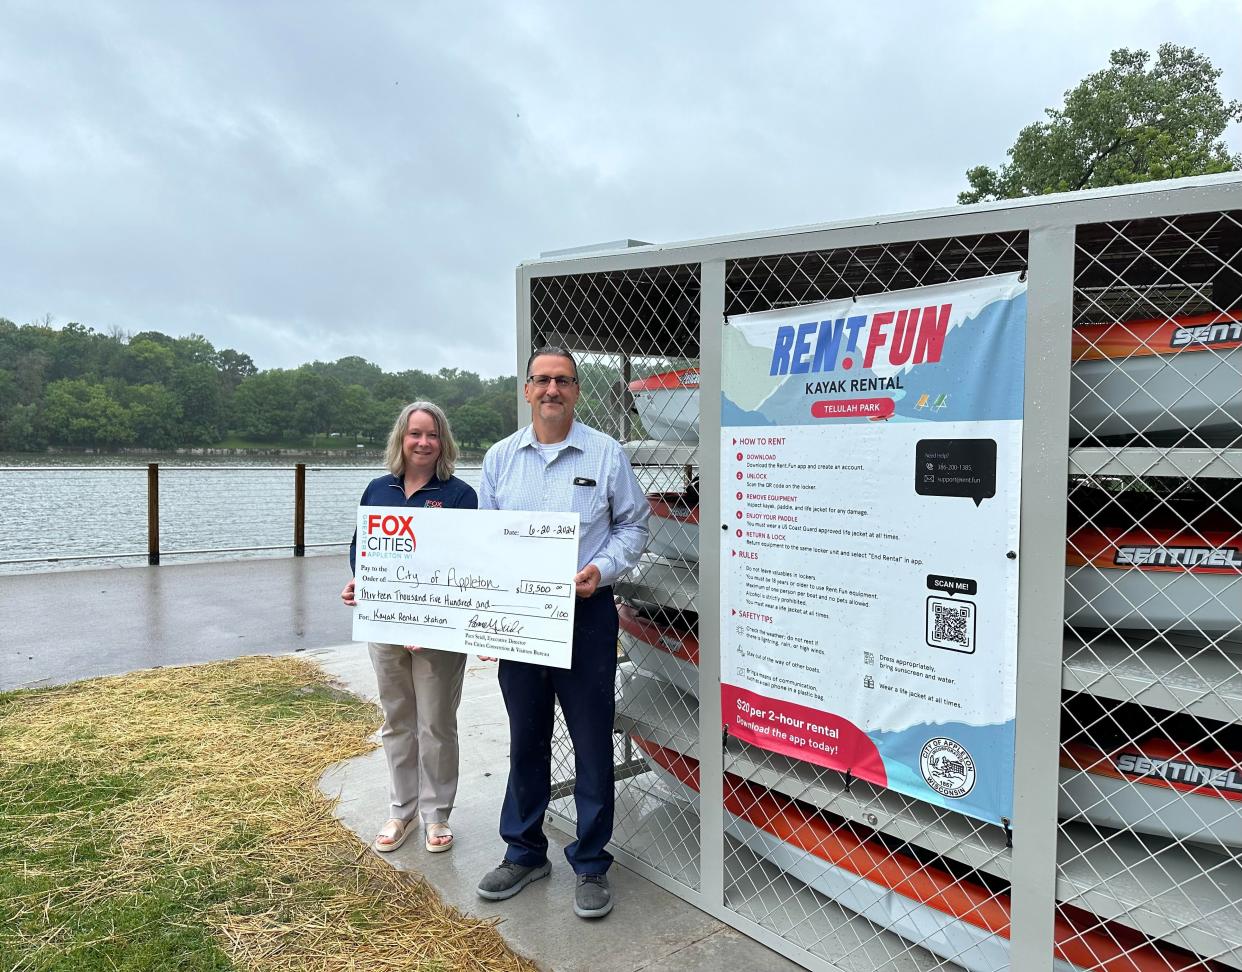 The City of Appleton was one of five communities to receive a grant from the Fox Cities Convention & Visitors Bureau to support their kayak rental station. The Appleton station is located in Telulah Park.